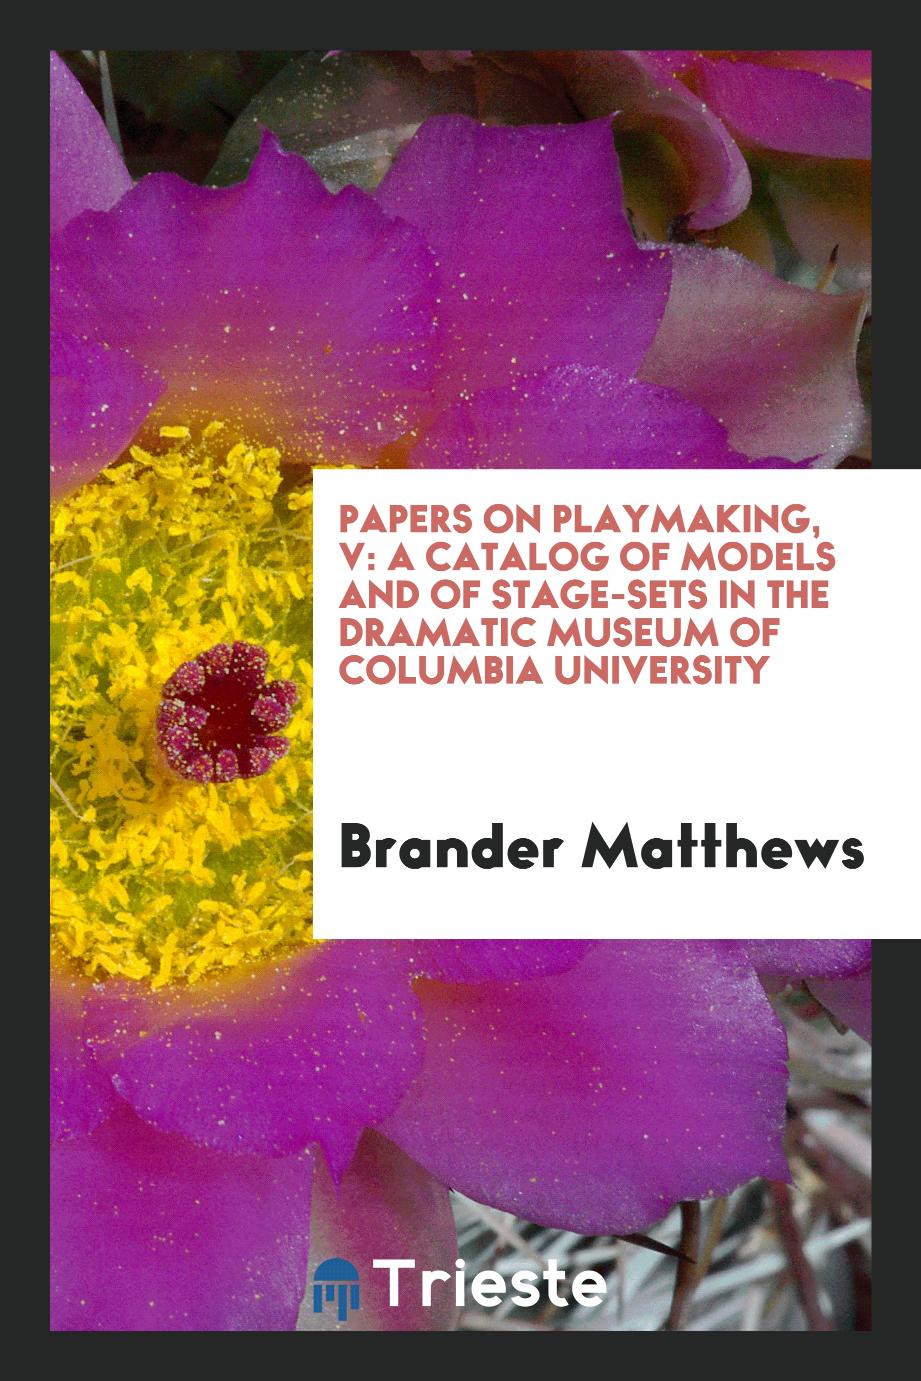 Papers on playmaking, V: A catalog of models and of stage-sets in the Dramatic Museum of Columbia University